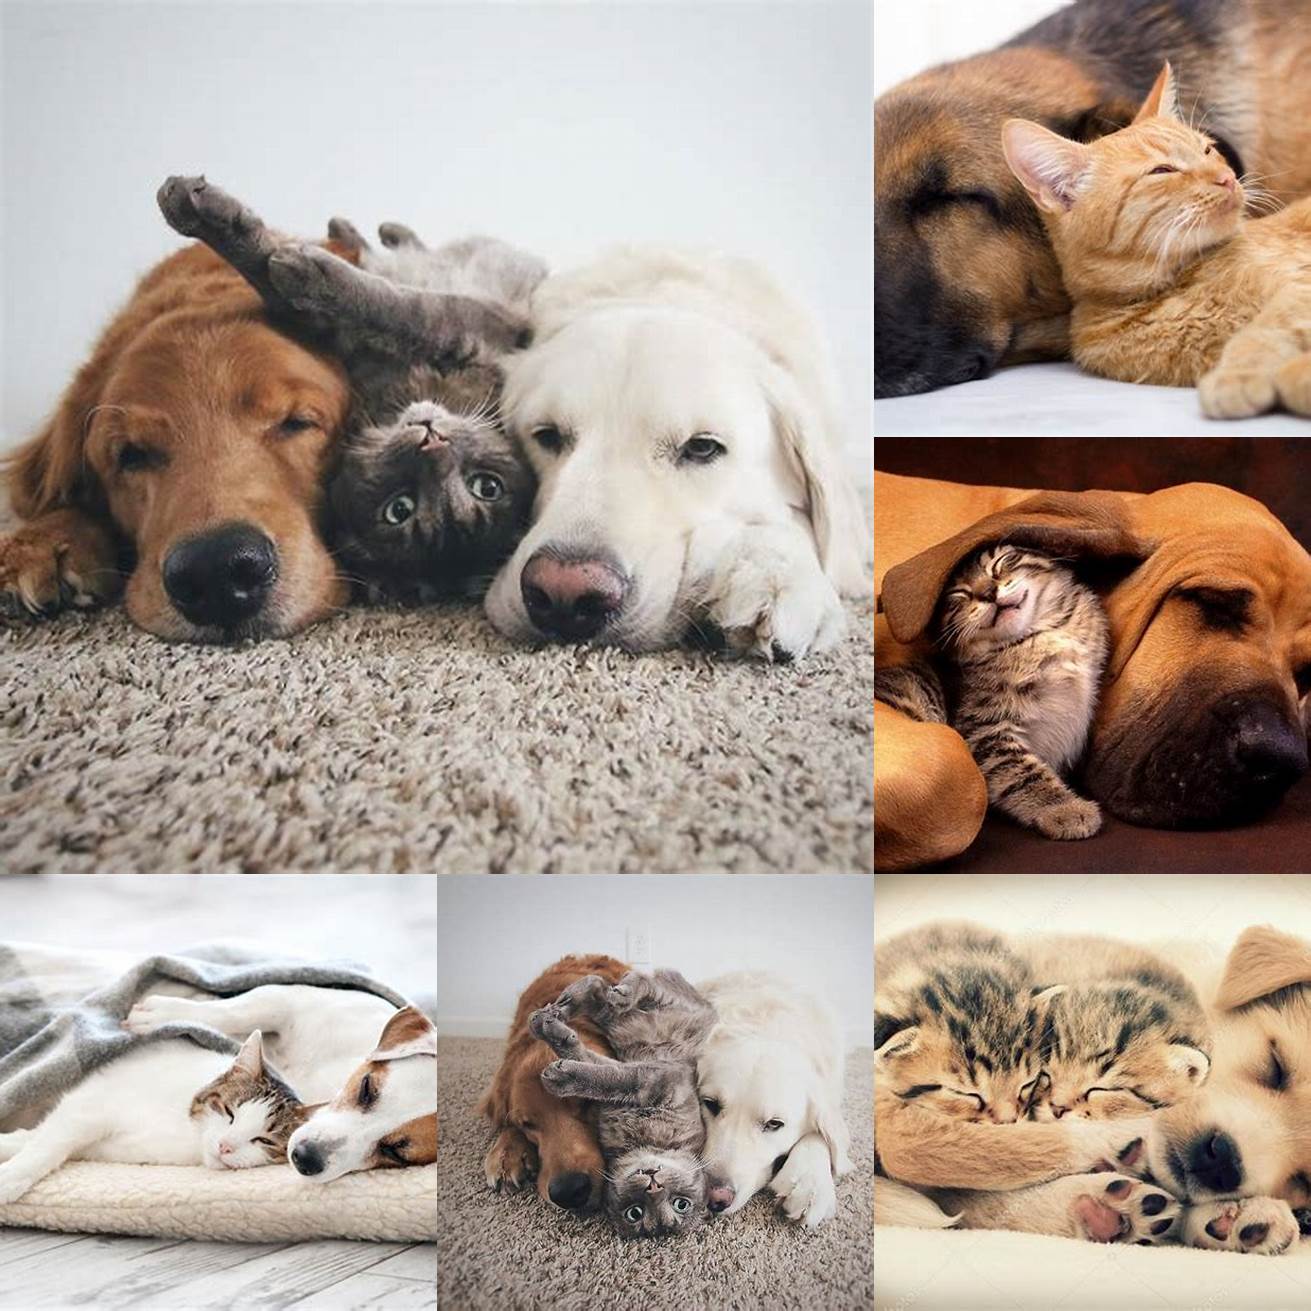 Image Idea 2 A Dog and a Cat Sleeping Together